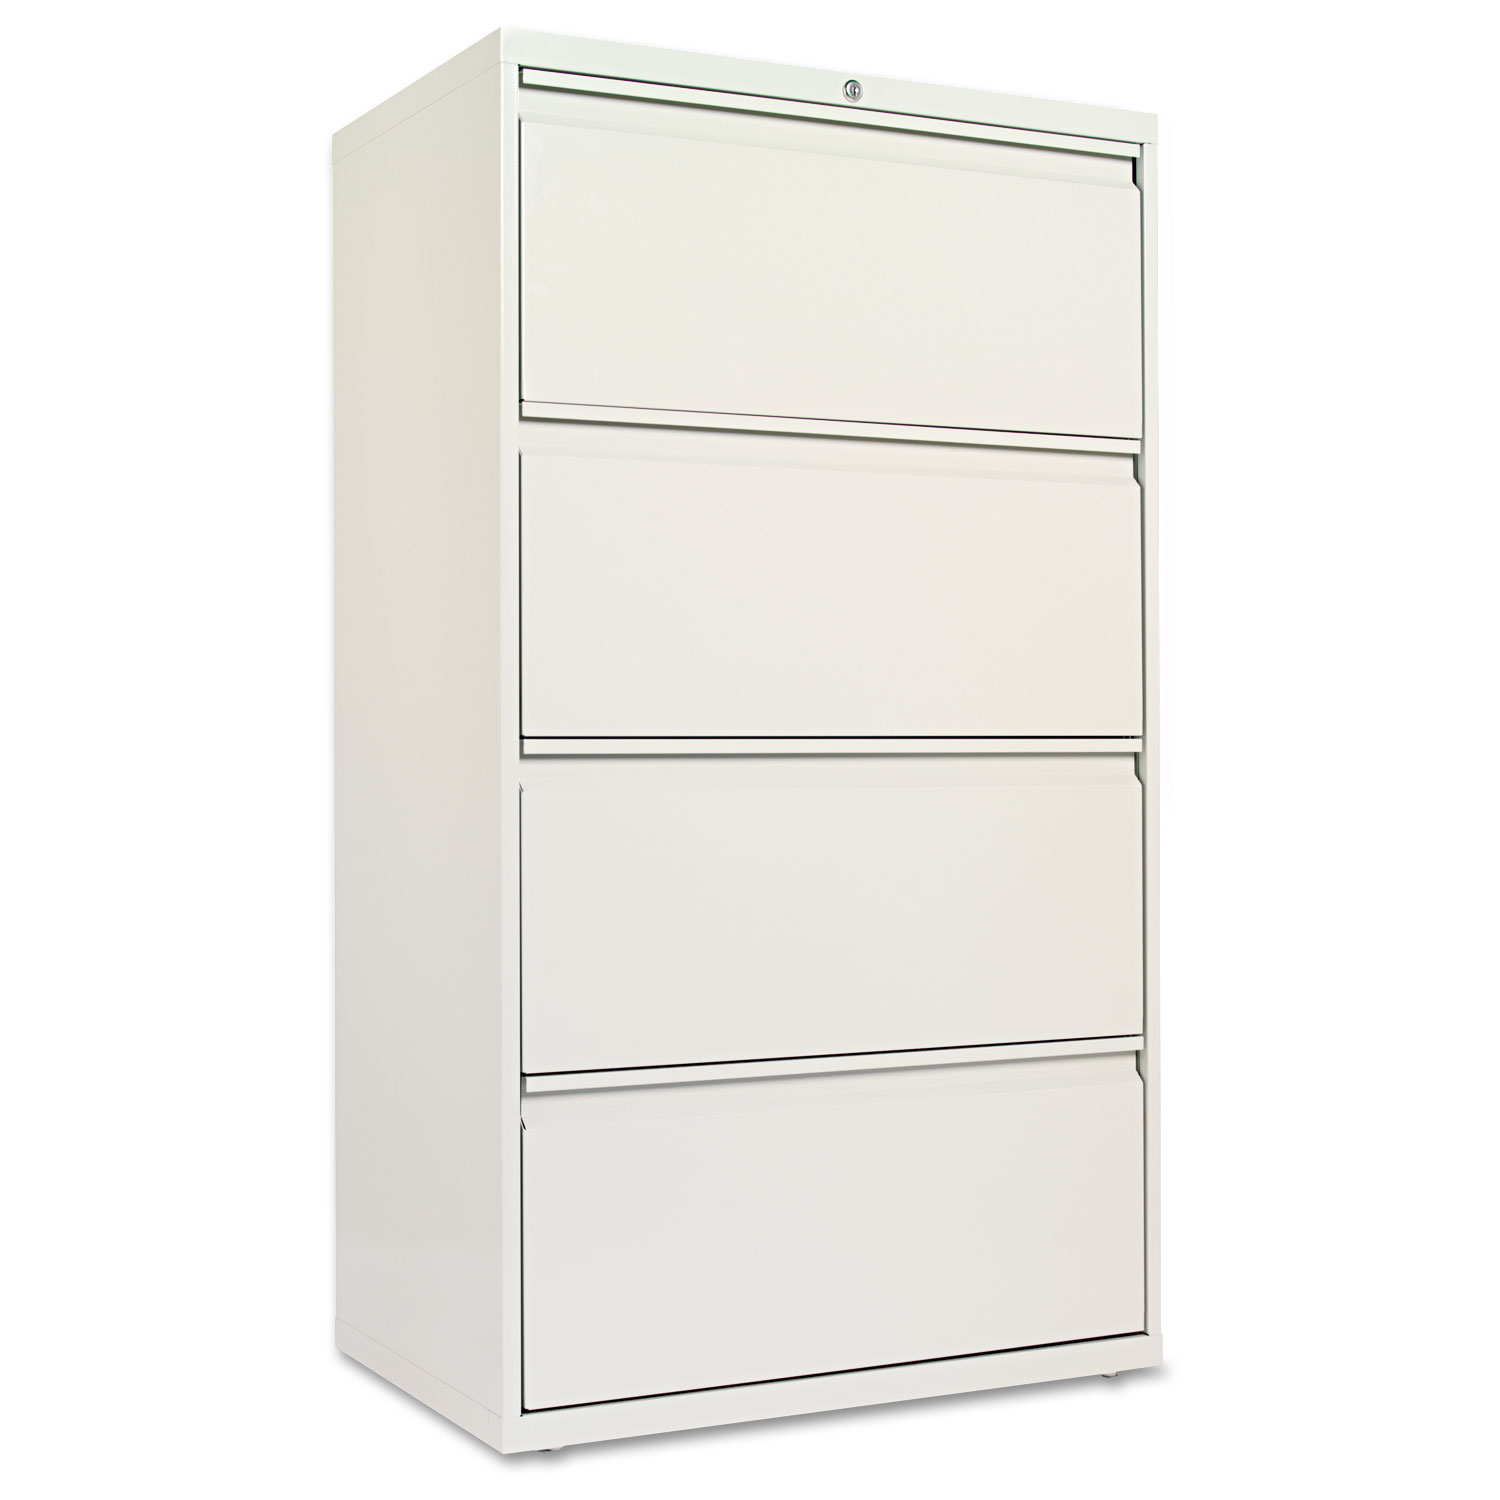 Alera Four-drawer Lateral File Cabinet, 30w X 18d X 52.5h, Light Gray - image 1 of 3